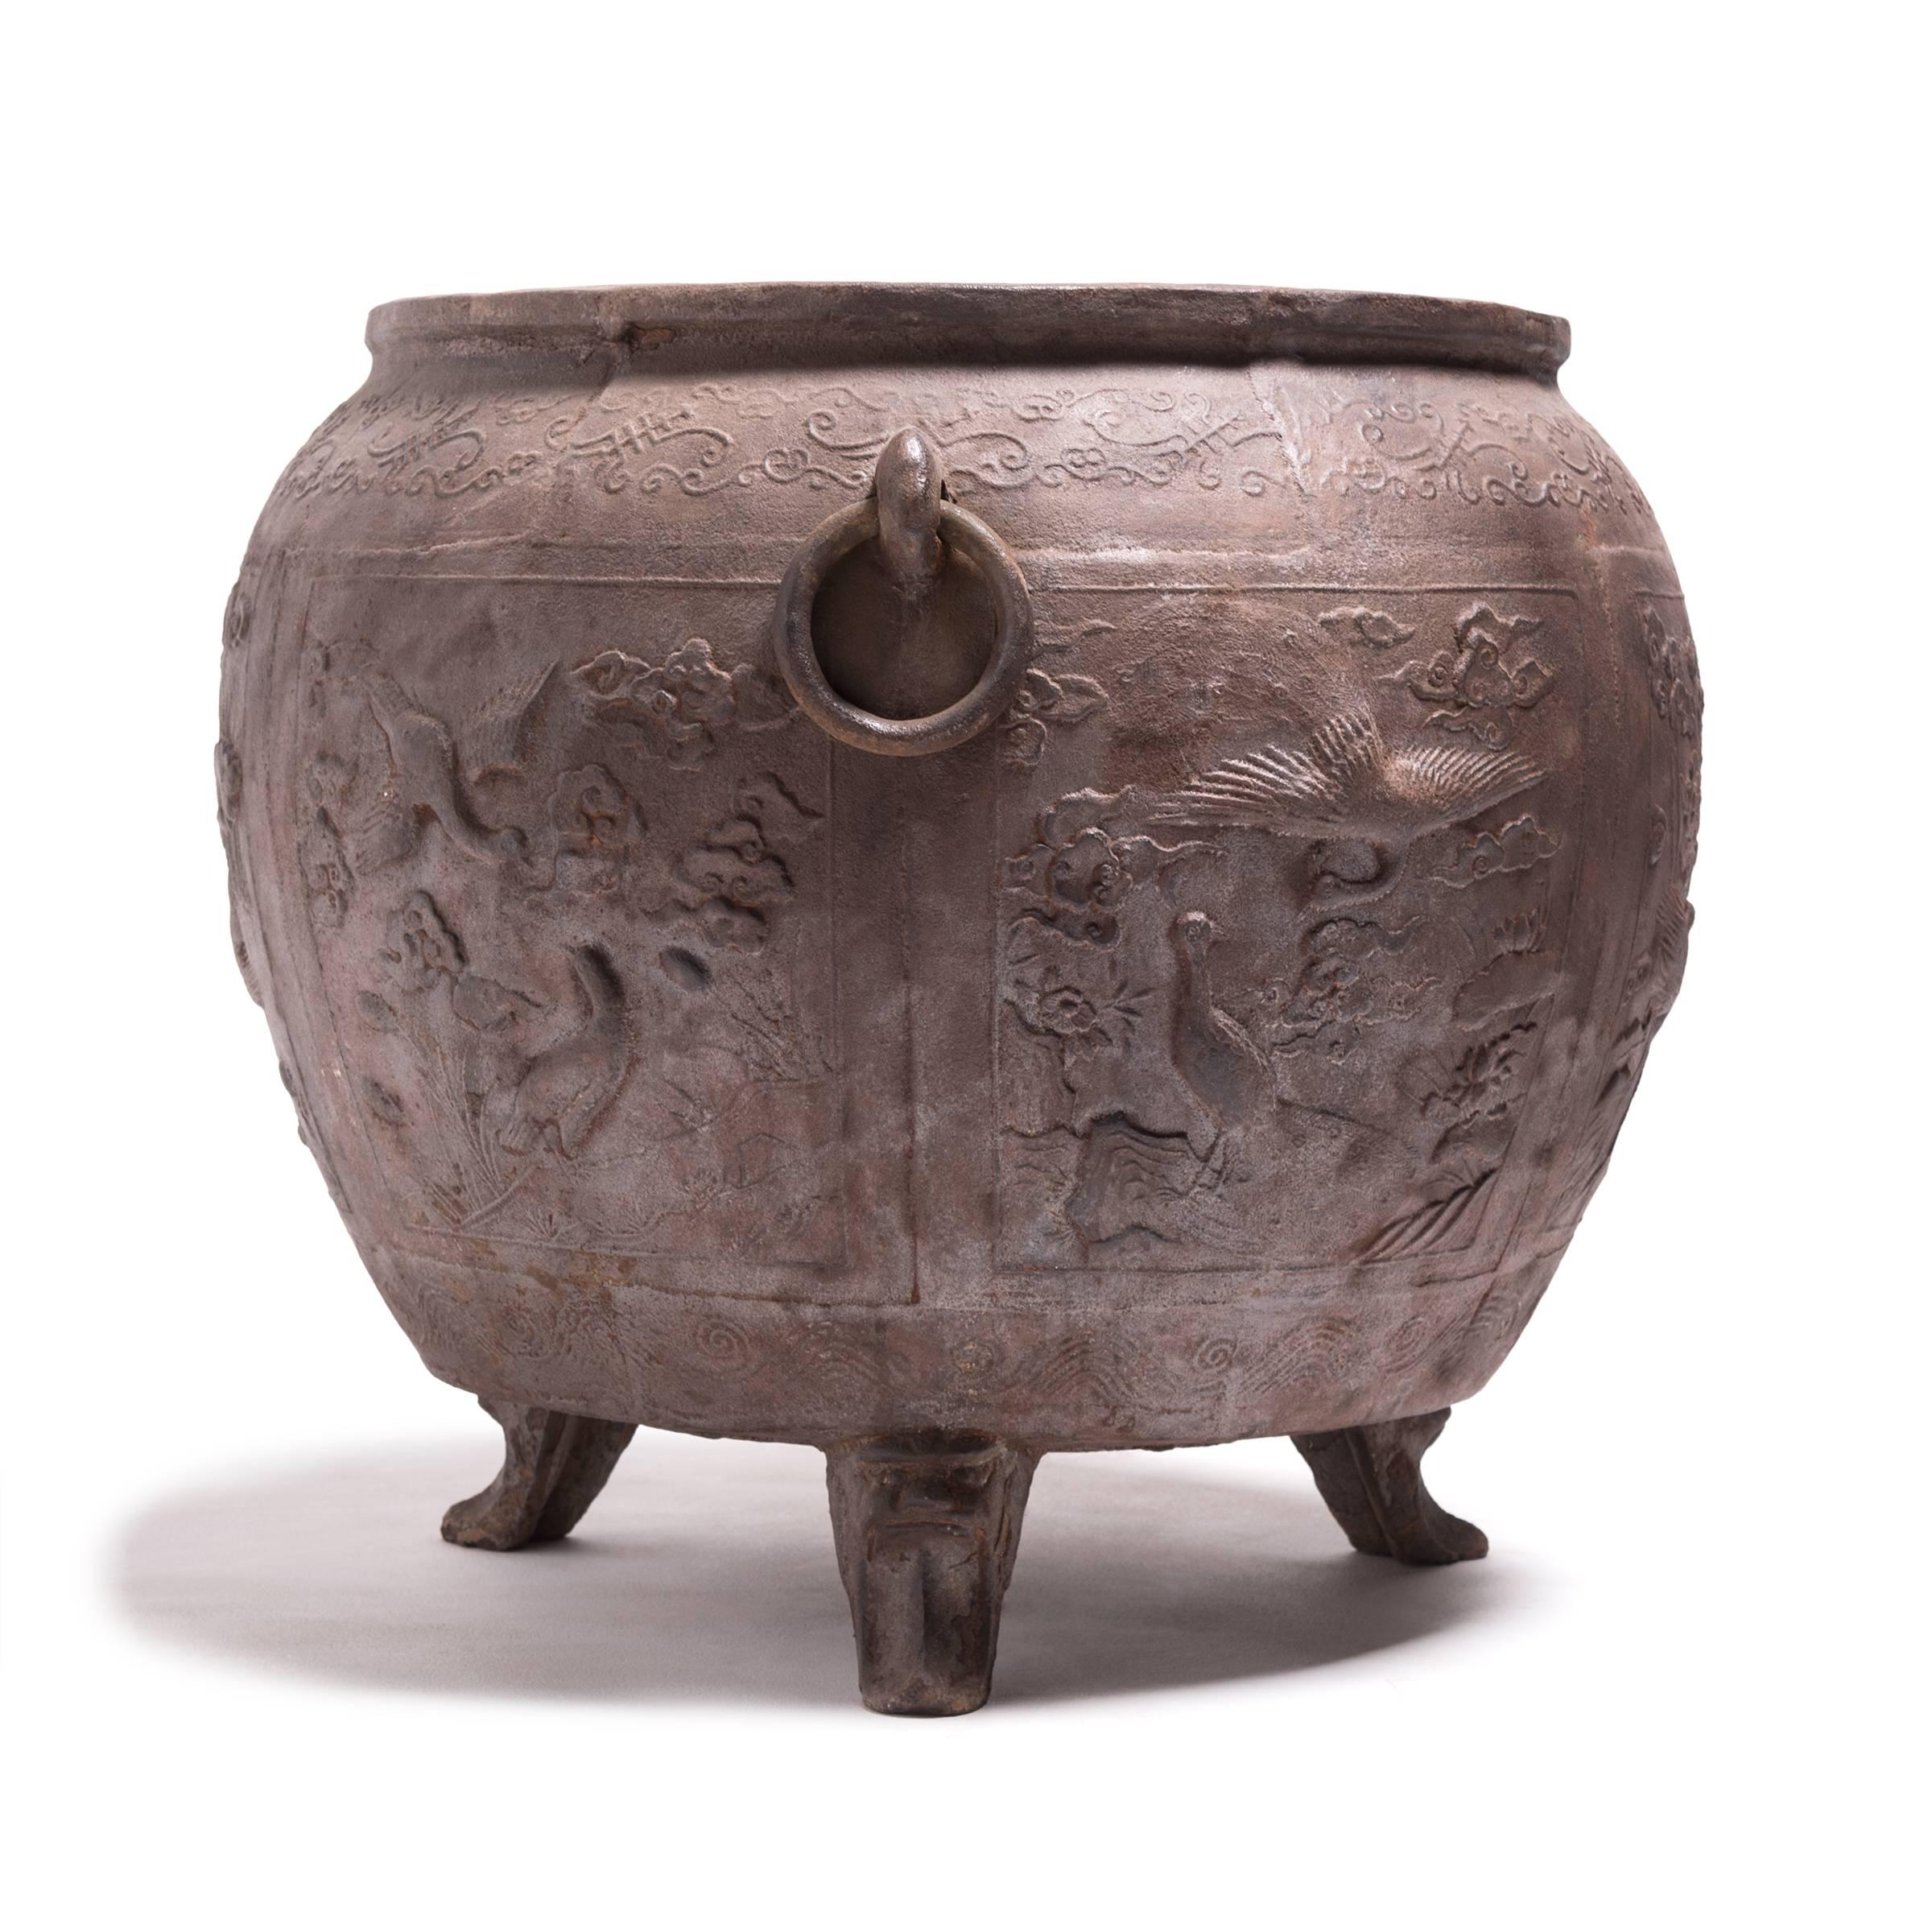 China was the earliest known civilization to make cast iron. It first appeared thousands of years ago during the illustrious Zhou Dynasty. This cast iron vessel is more recent, but the quality and form were inspired by these ancient techniques